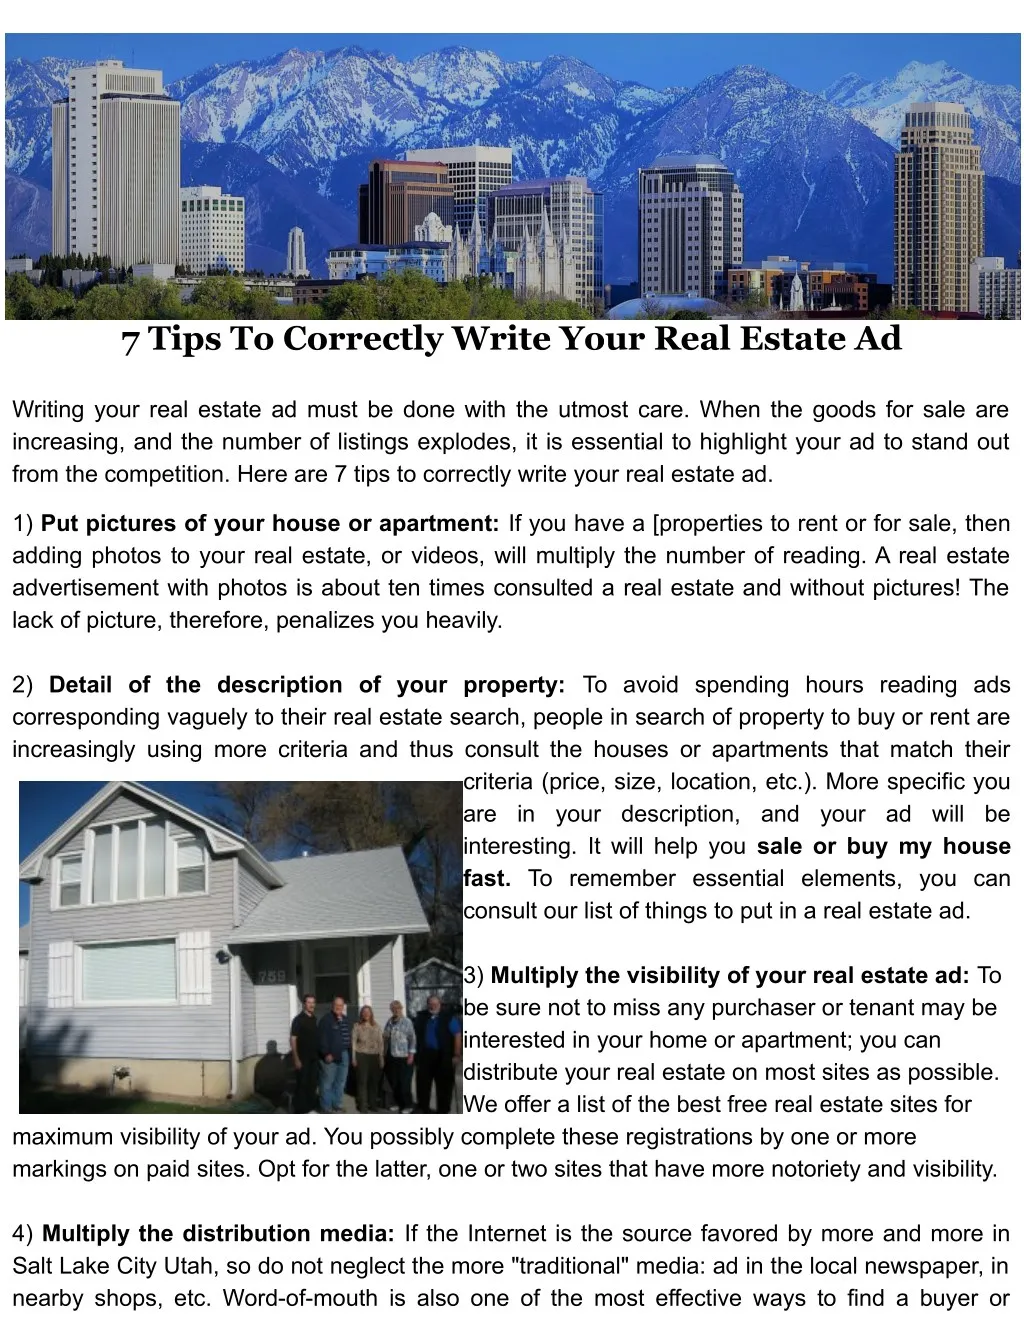 7 tips to correctly write your real estate ad